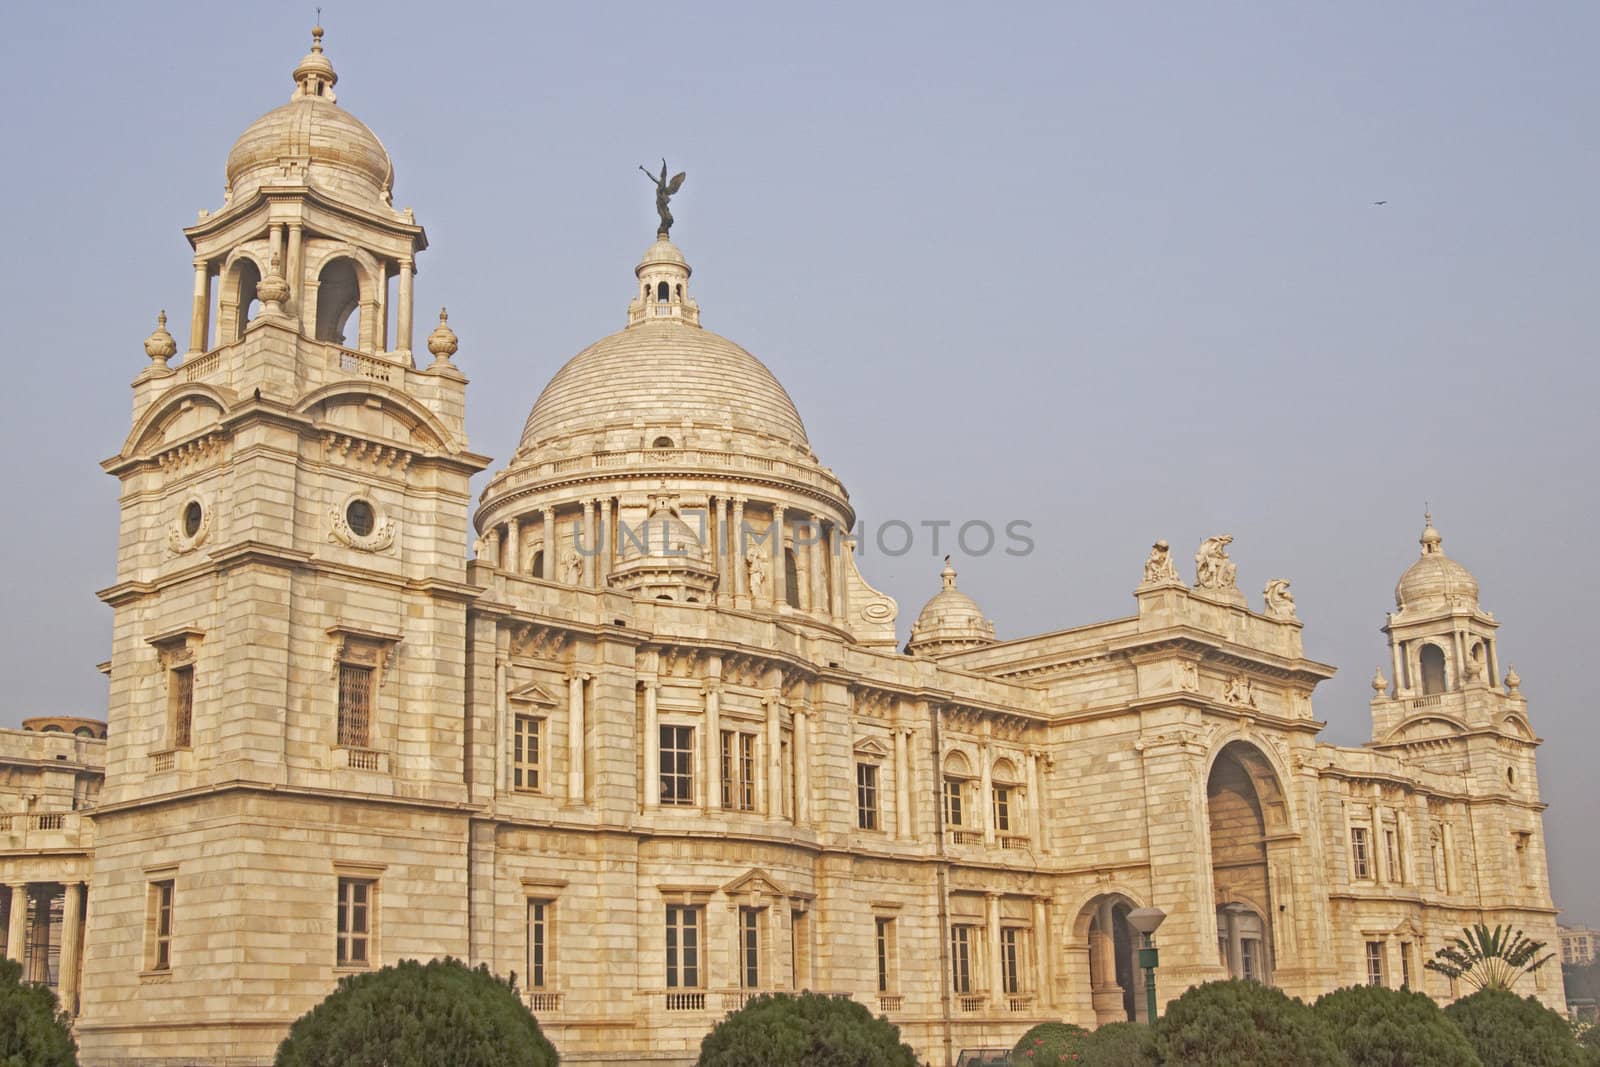 Victoria Memorial in Kolkata, India. Built as a monument to Queen Victoria of Great Britain, now a museum.